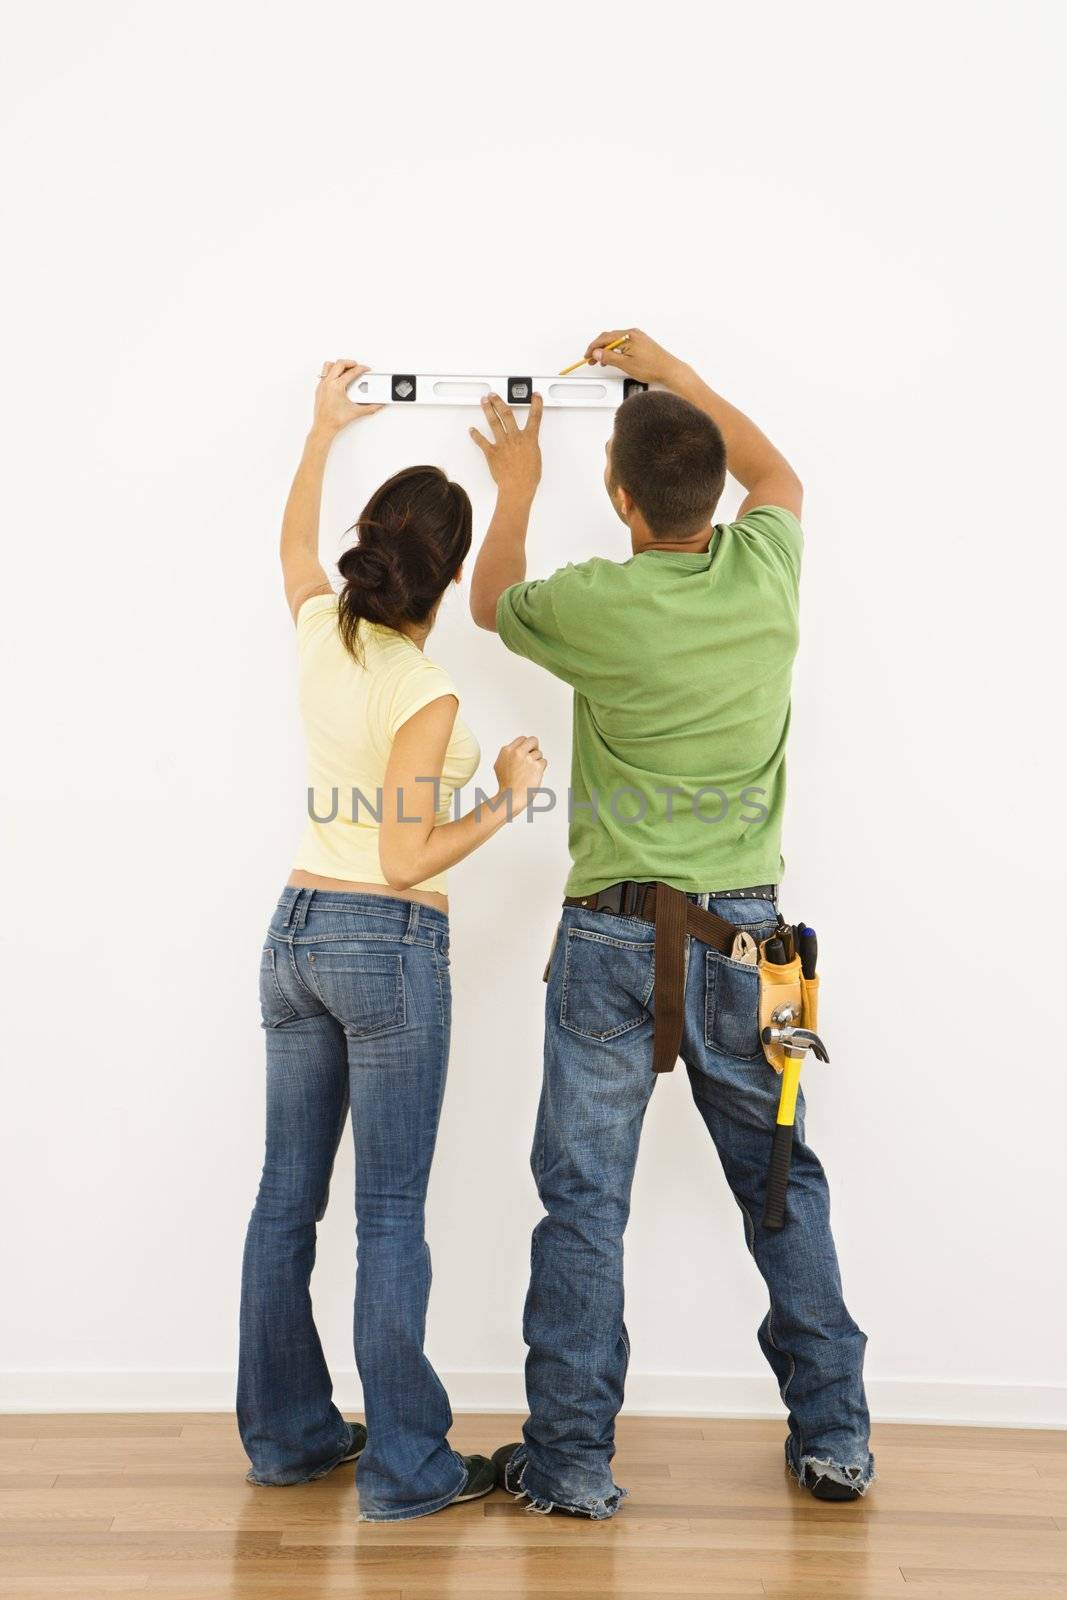 Couple holding level to interior wall and marking with pencil.